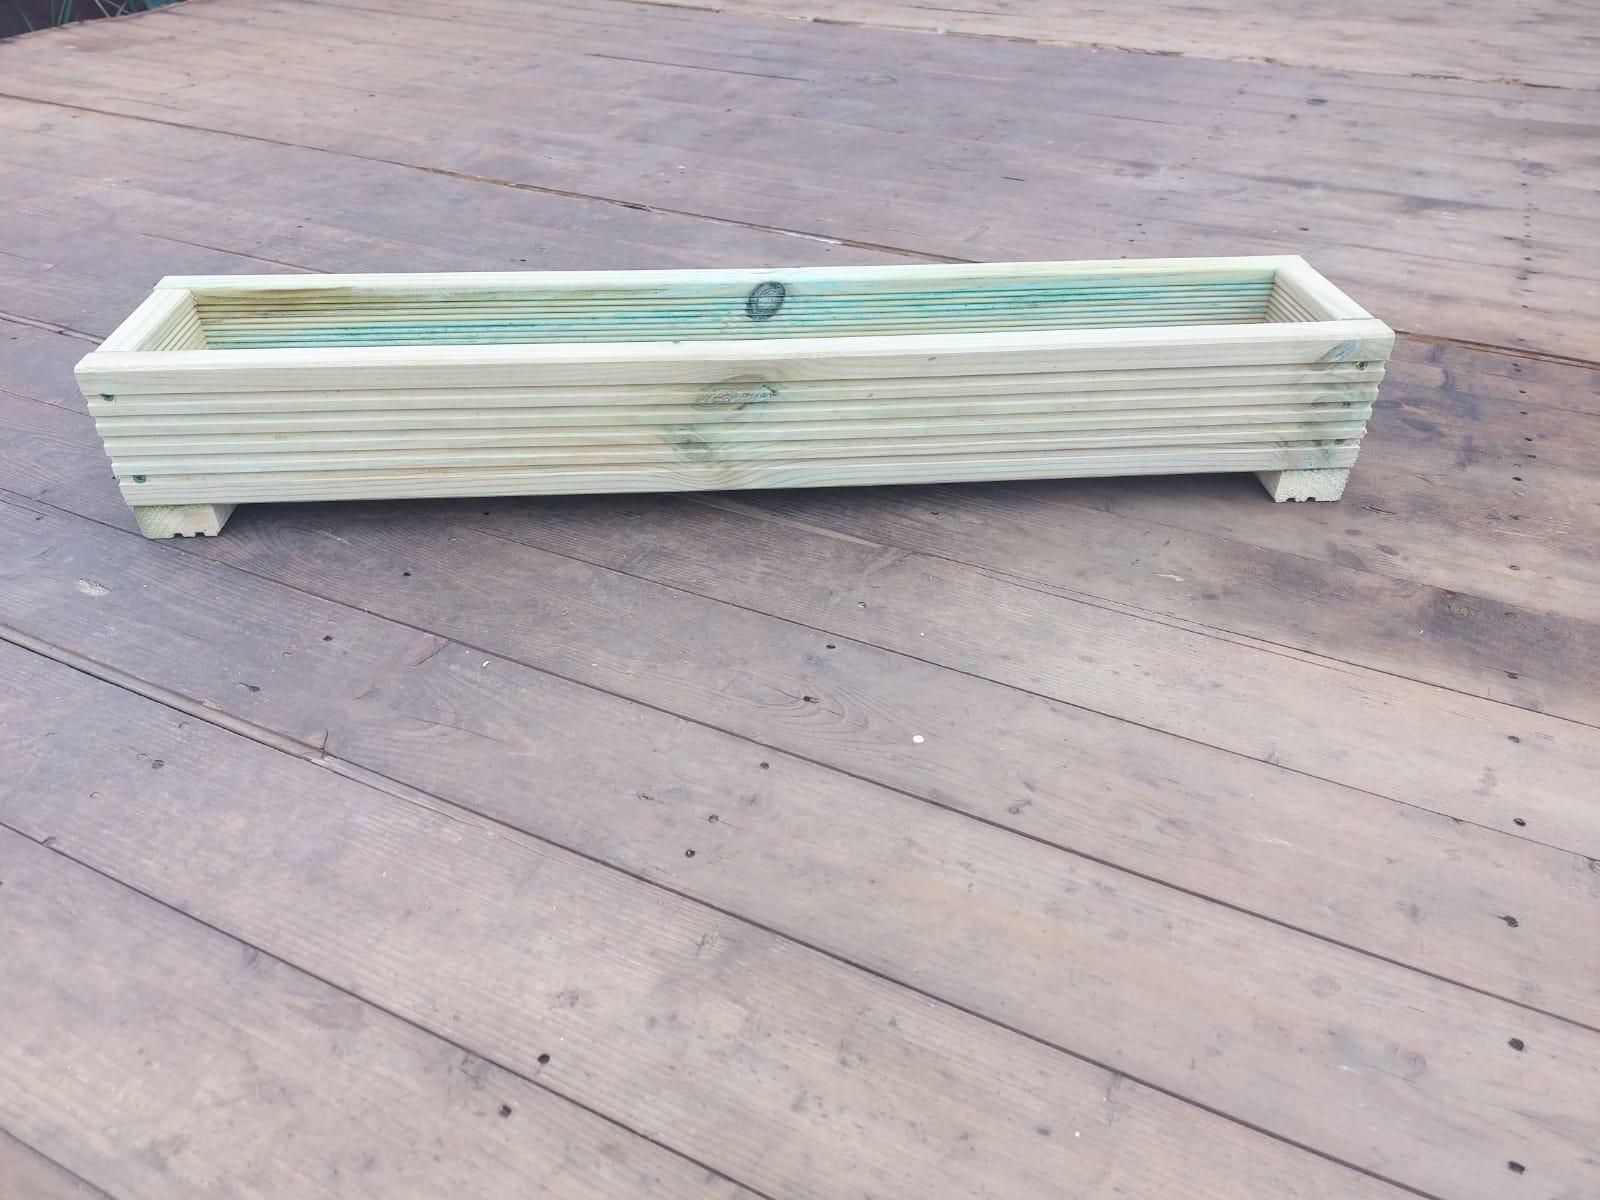 decking planter on a wooden base